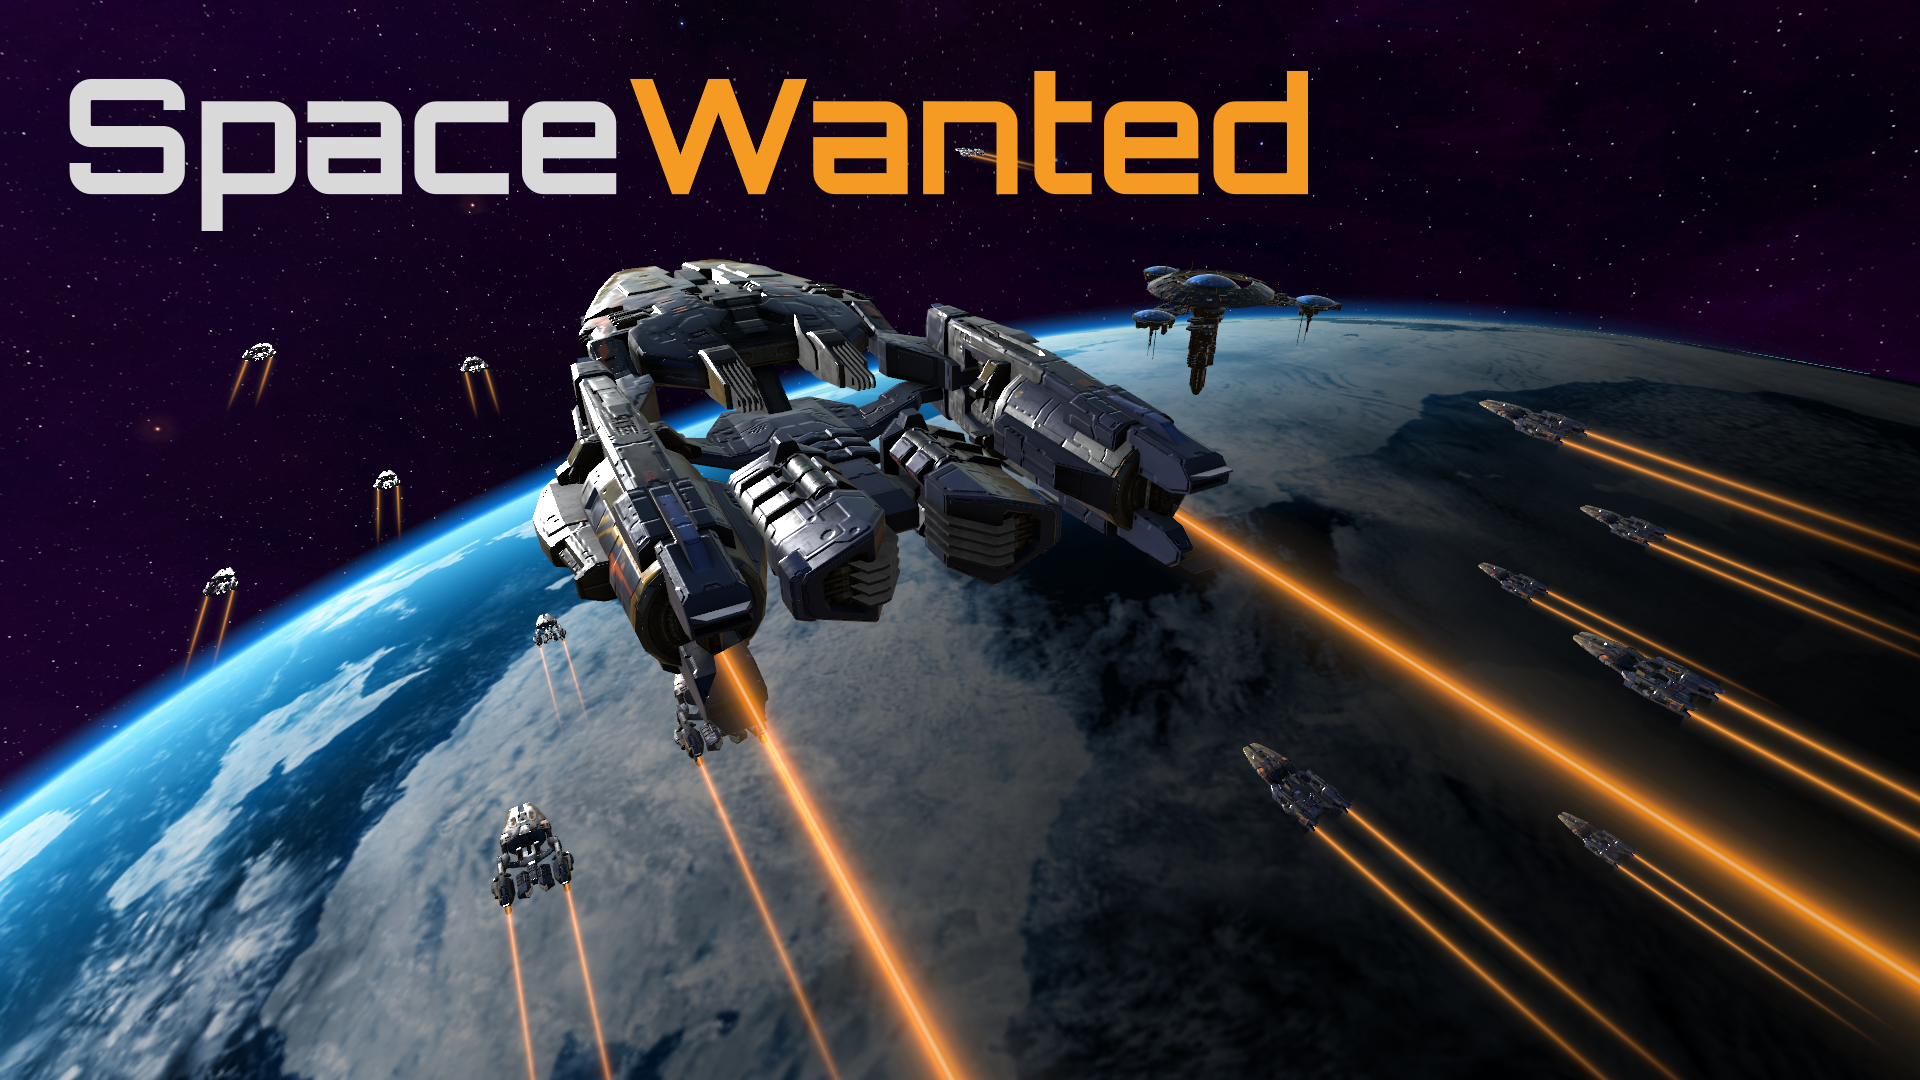 Banner of Space Wanted 